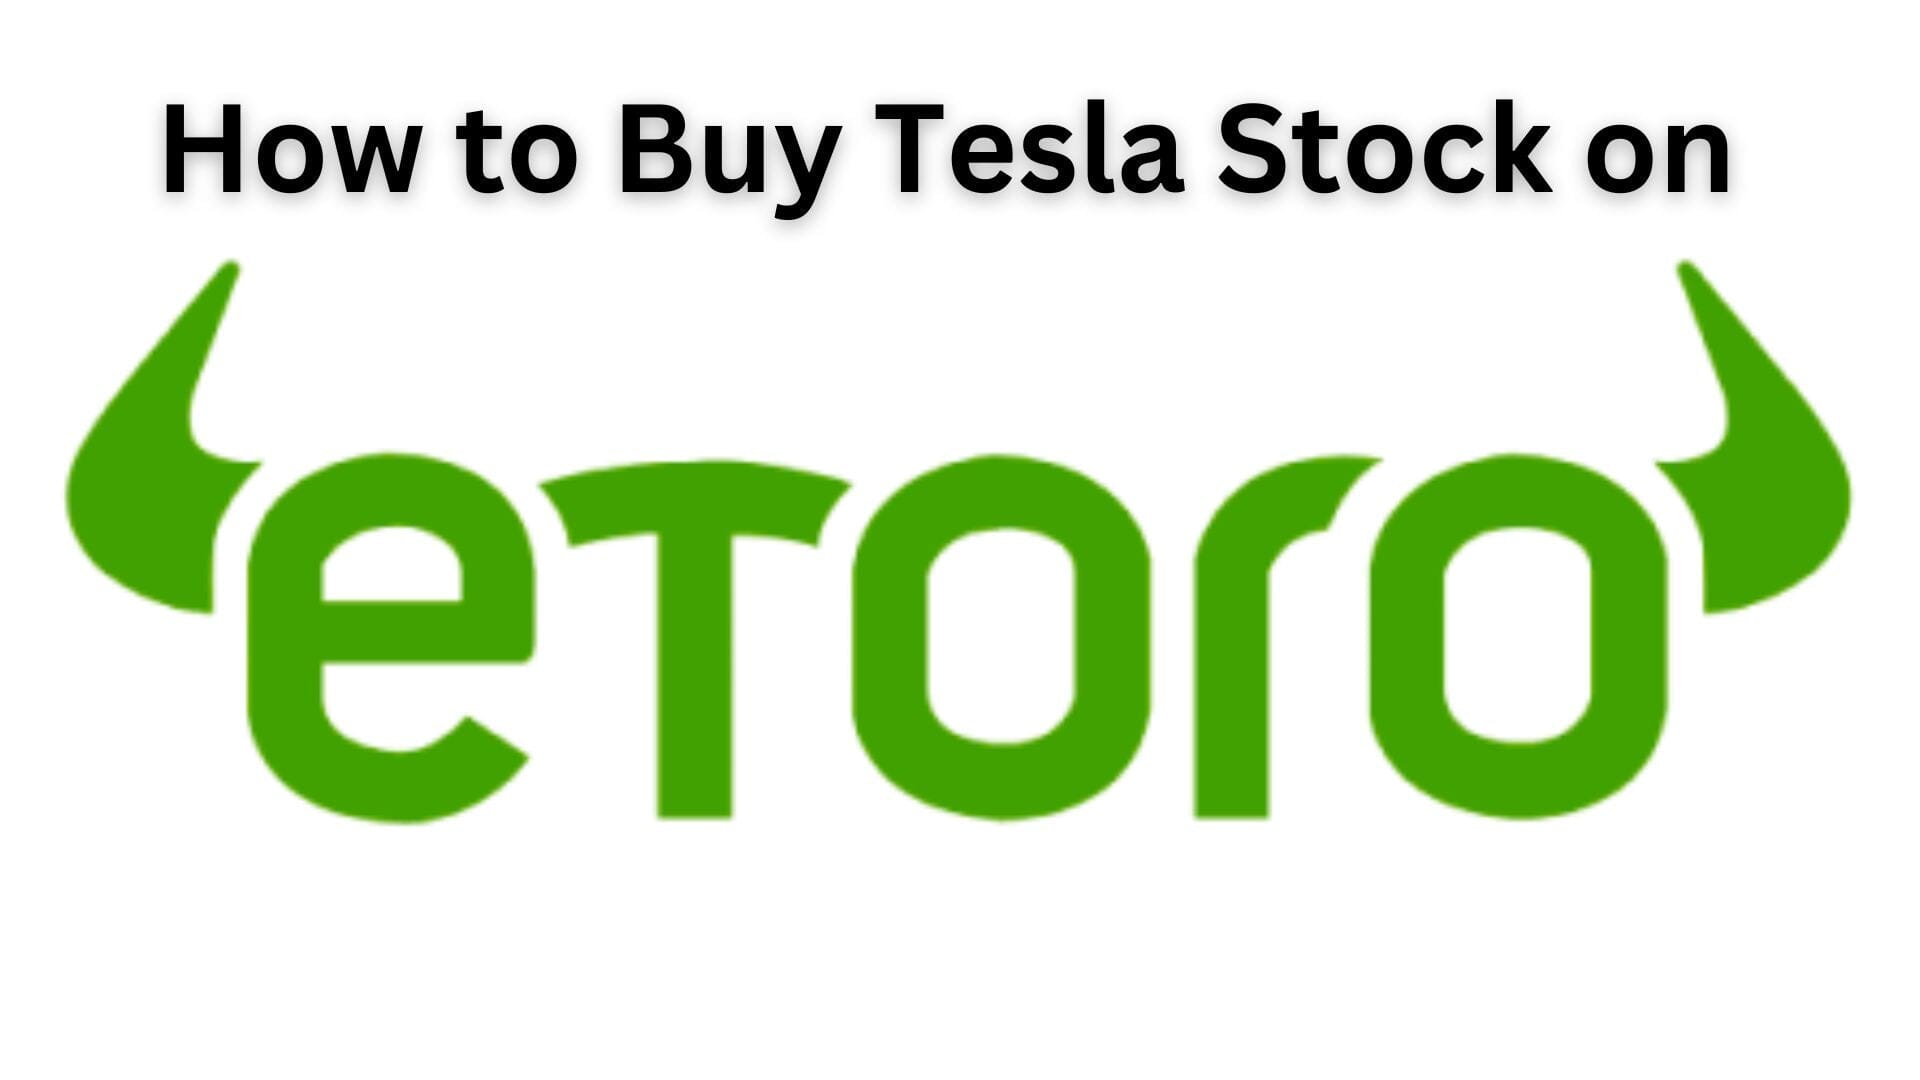 How to Buy Tesla Stock on eToro: A Step-by-Step Guide